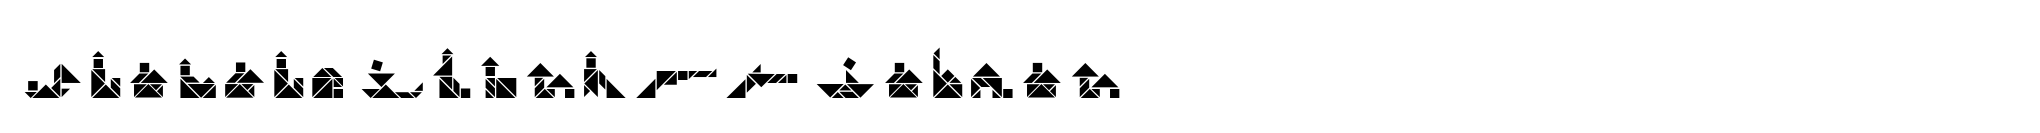 Tangram Objects Inline image